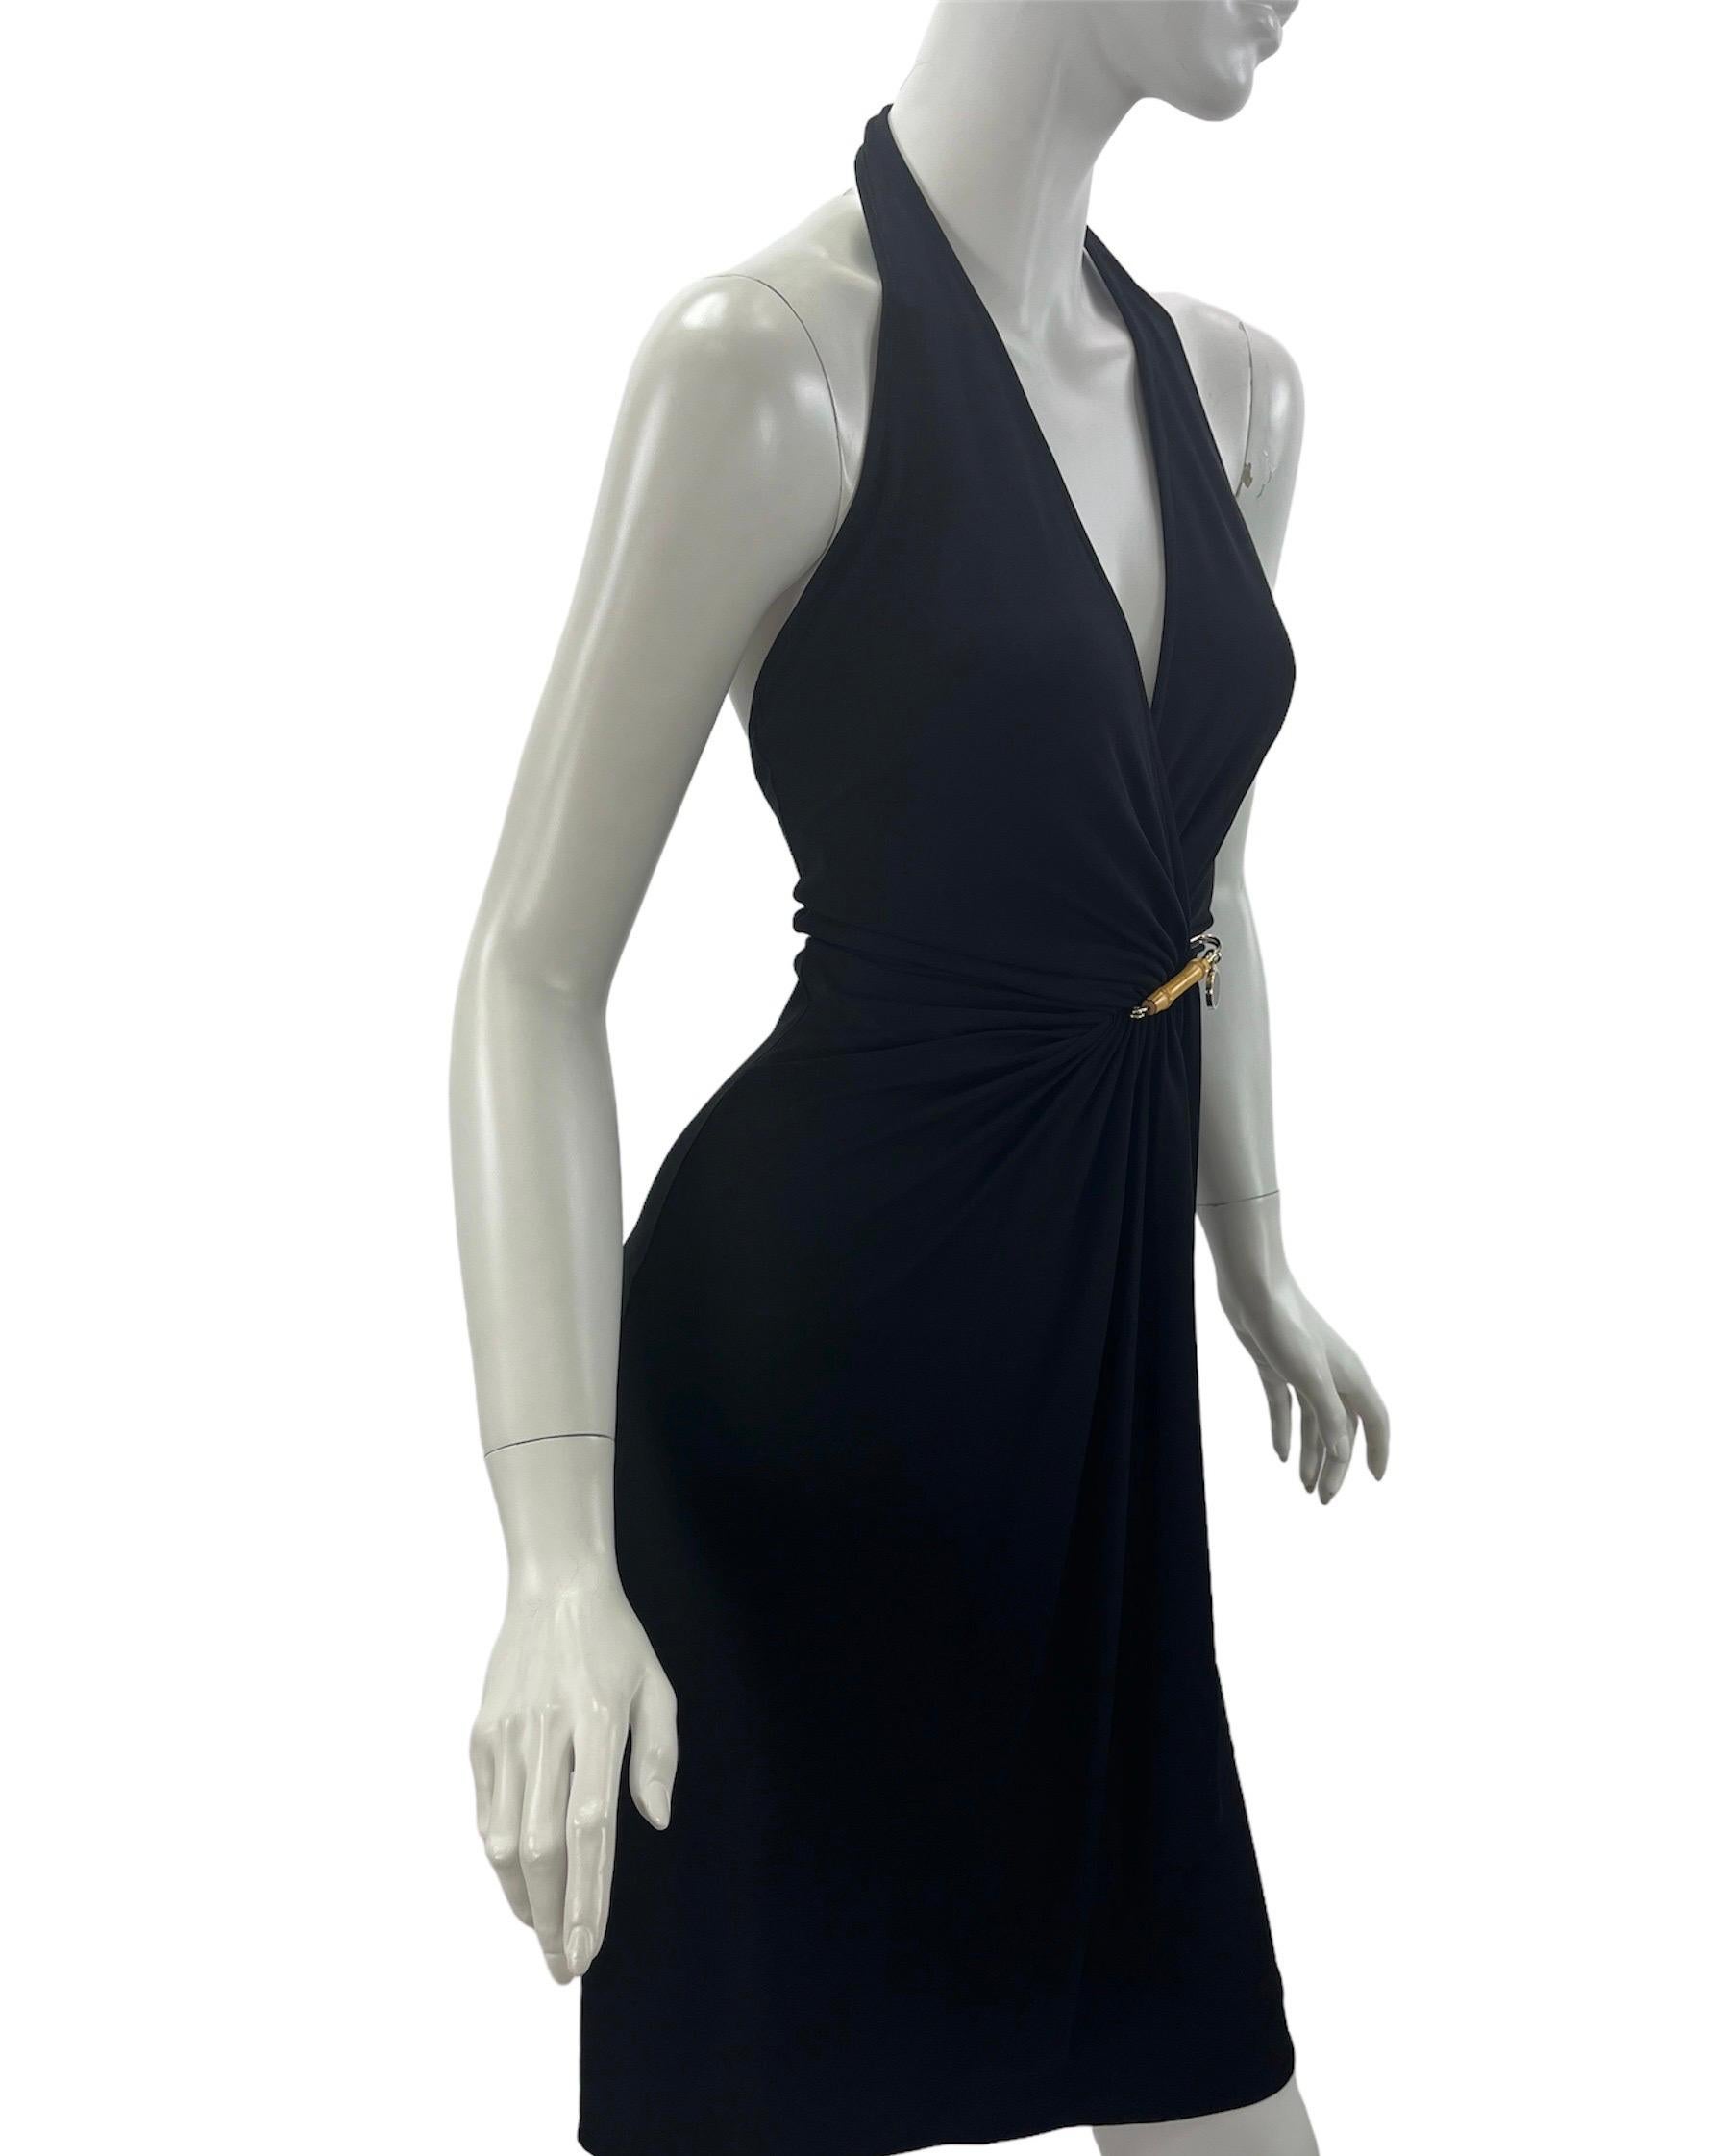 2006 Vintage Gucci Black Dress with Wrap Effect and Bamboo Pin
S/S 2006 Collection
Italian size 38 - US 2
Halter- Neck, Open Back, Fully Lined, Wrap Effect, Removable Bamboo Pin. 
92% Rayon, 8% Elastane. 
Measurements: Length - 39 inches, Waist -